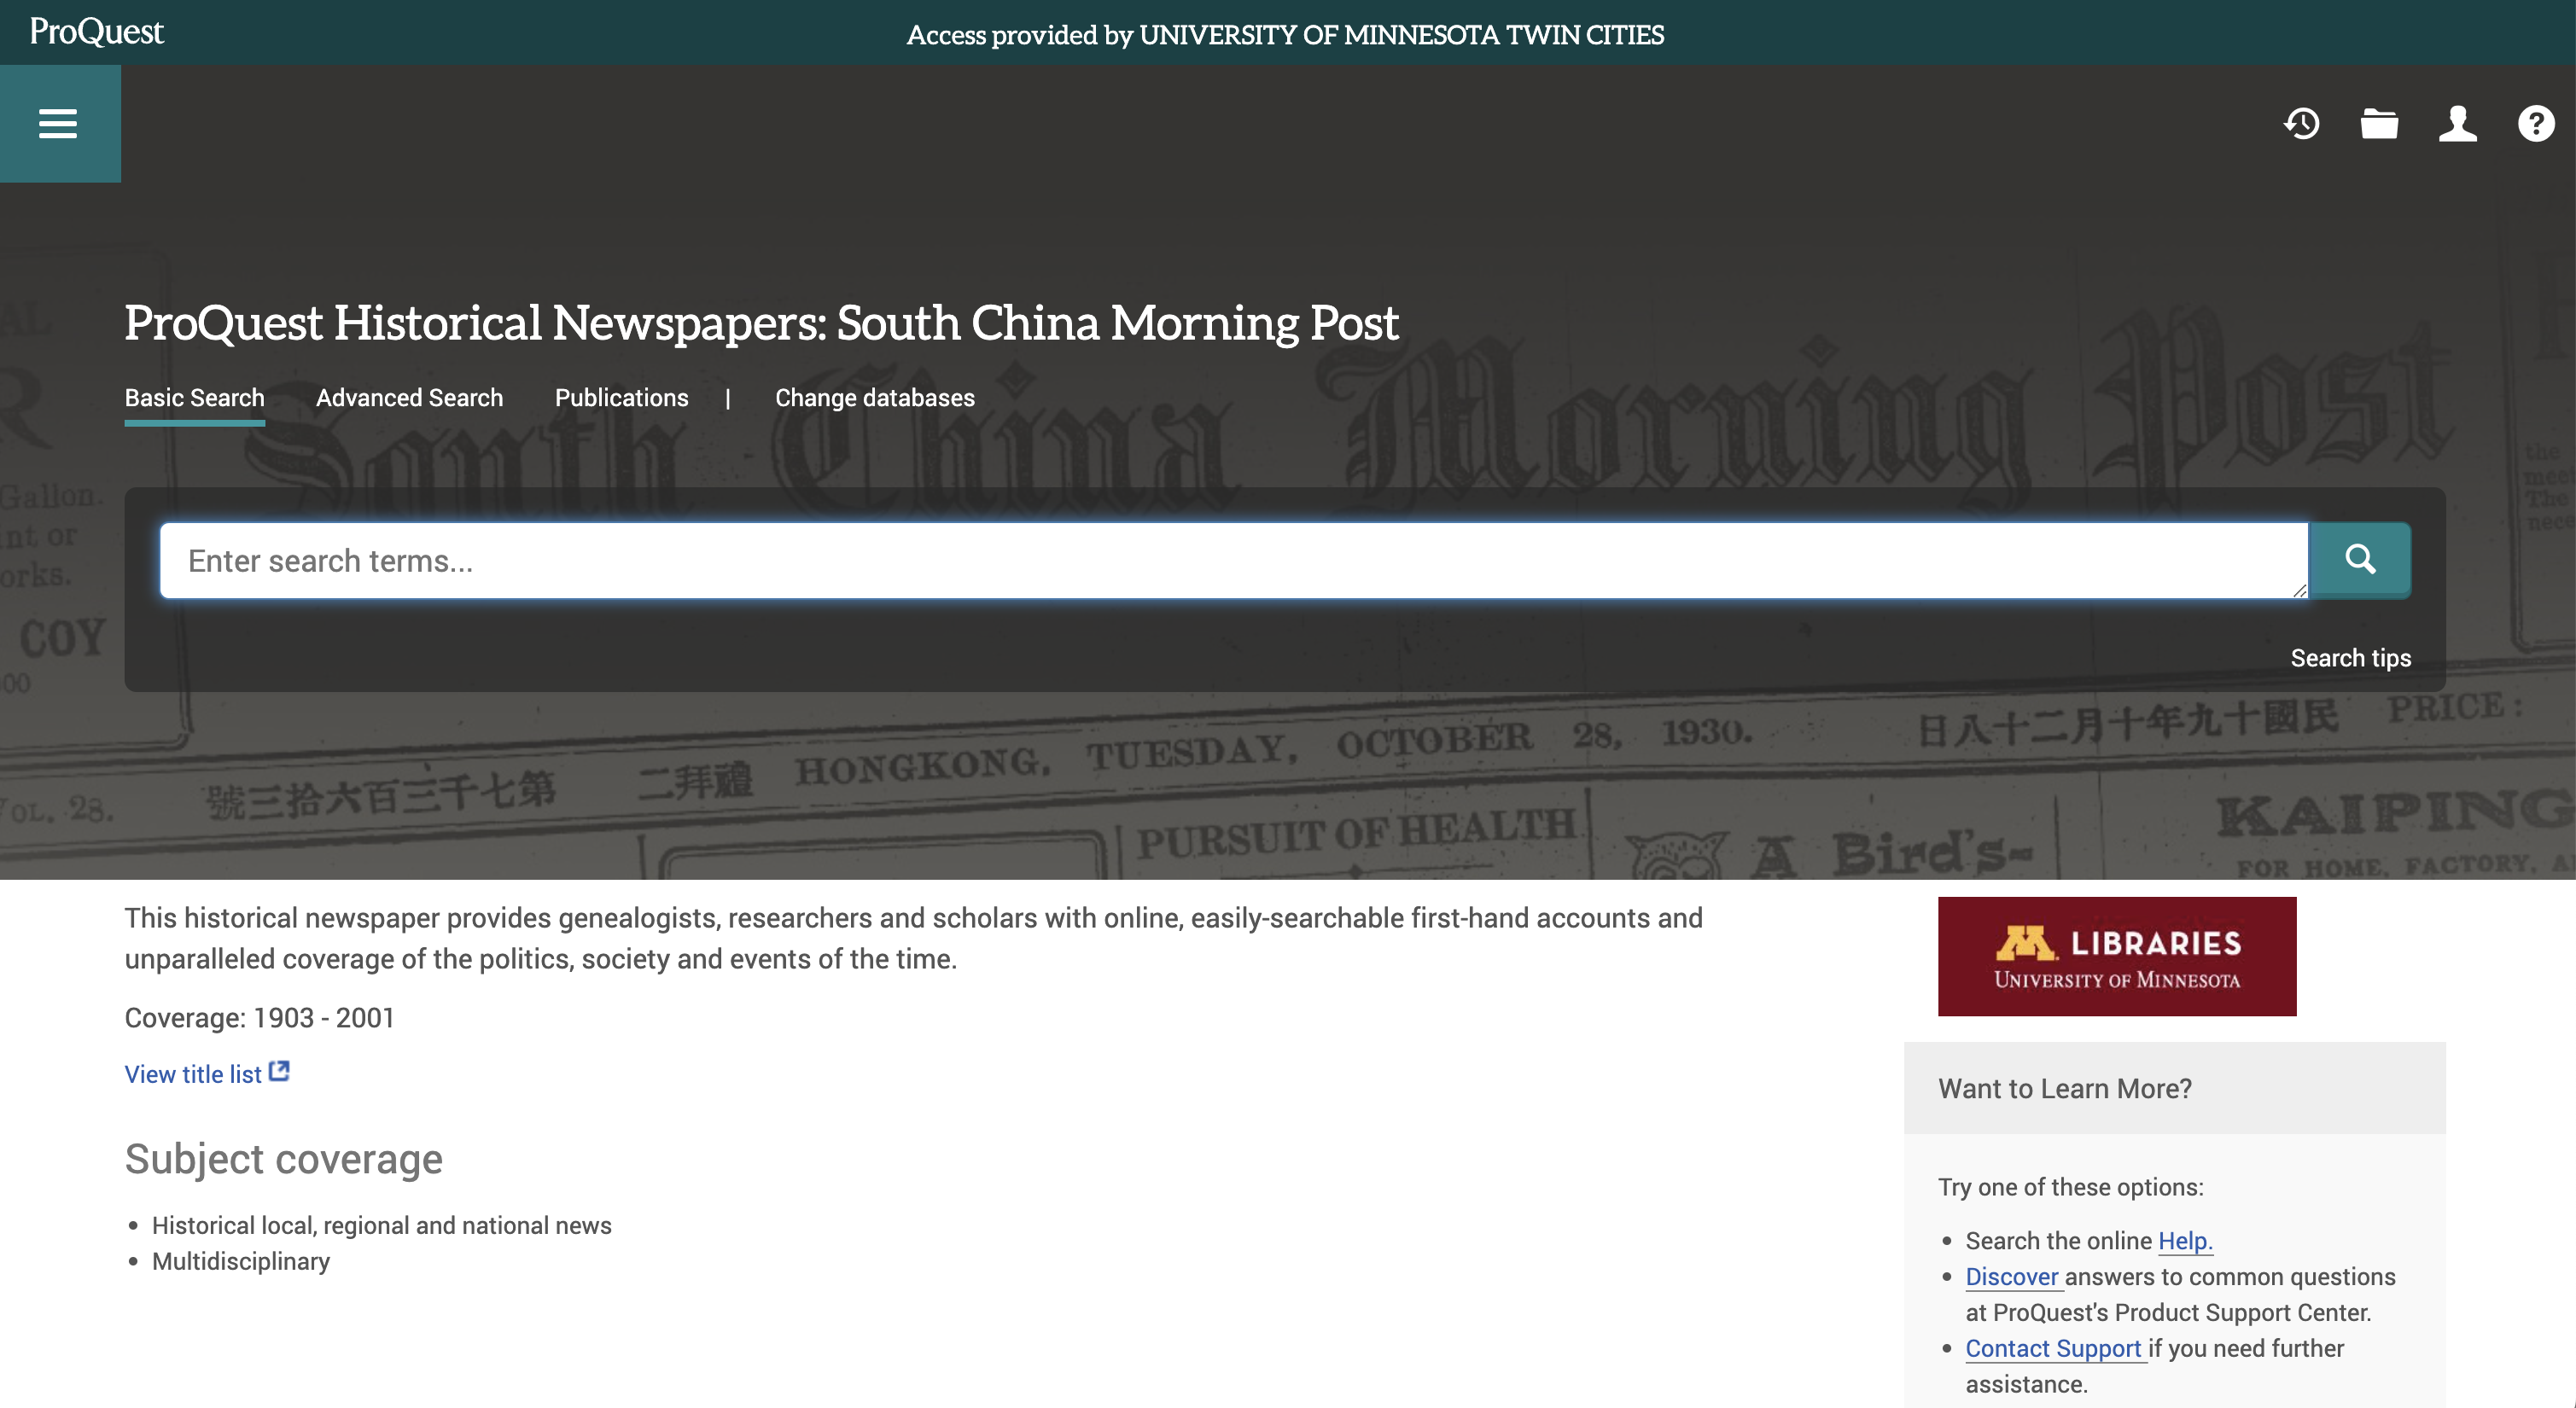 This is the image of the South China Morning Post.